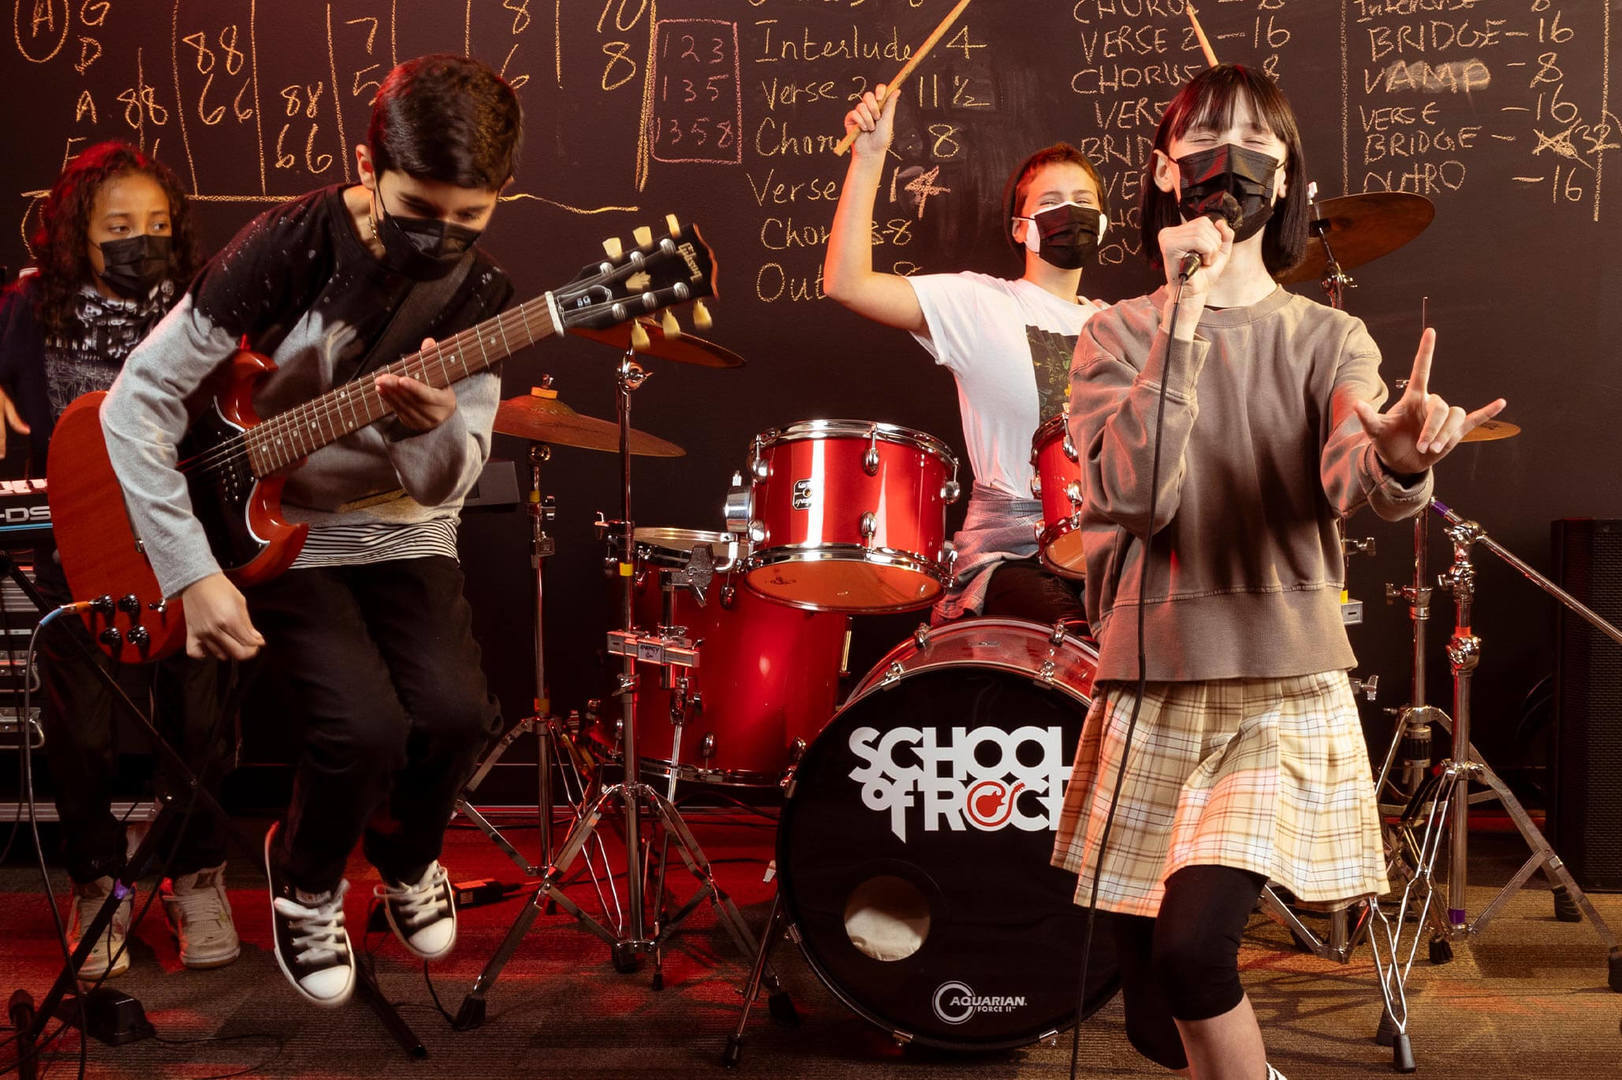 School of Rock | "Classic Rock Rewind" 5 Day Winter Camp (Ages 7-18), Vancouver, British Columbia, Canada